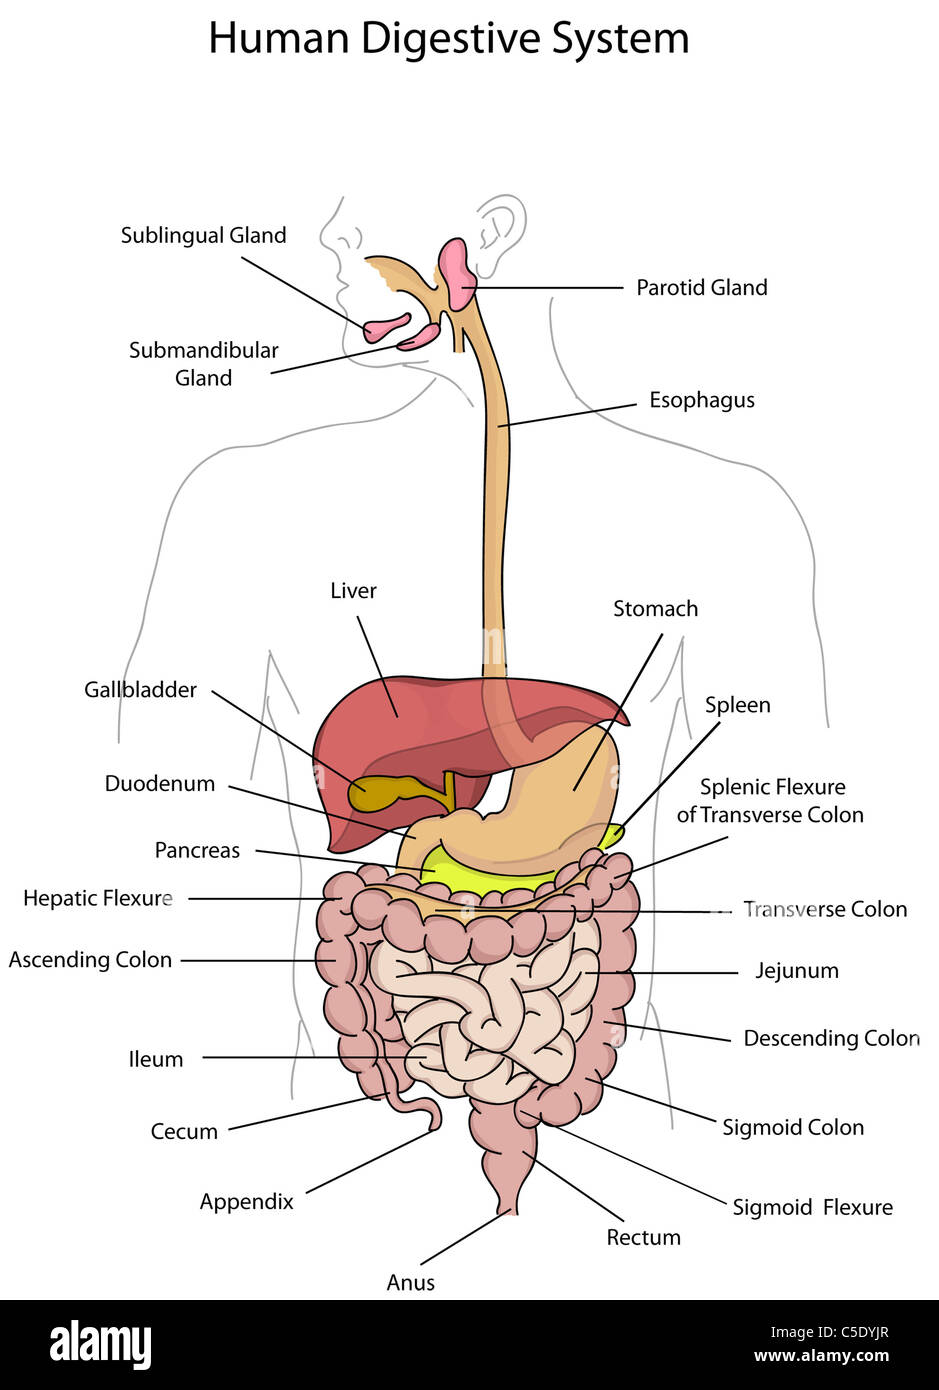 Human Digestive System Illustration Exclusive To Only